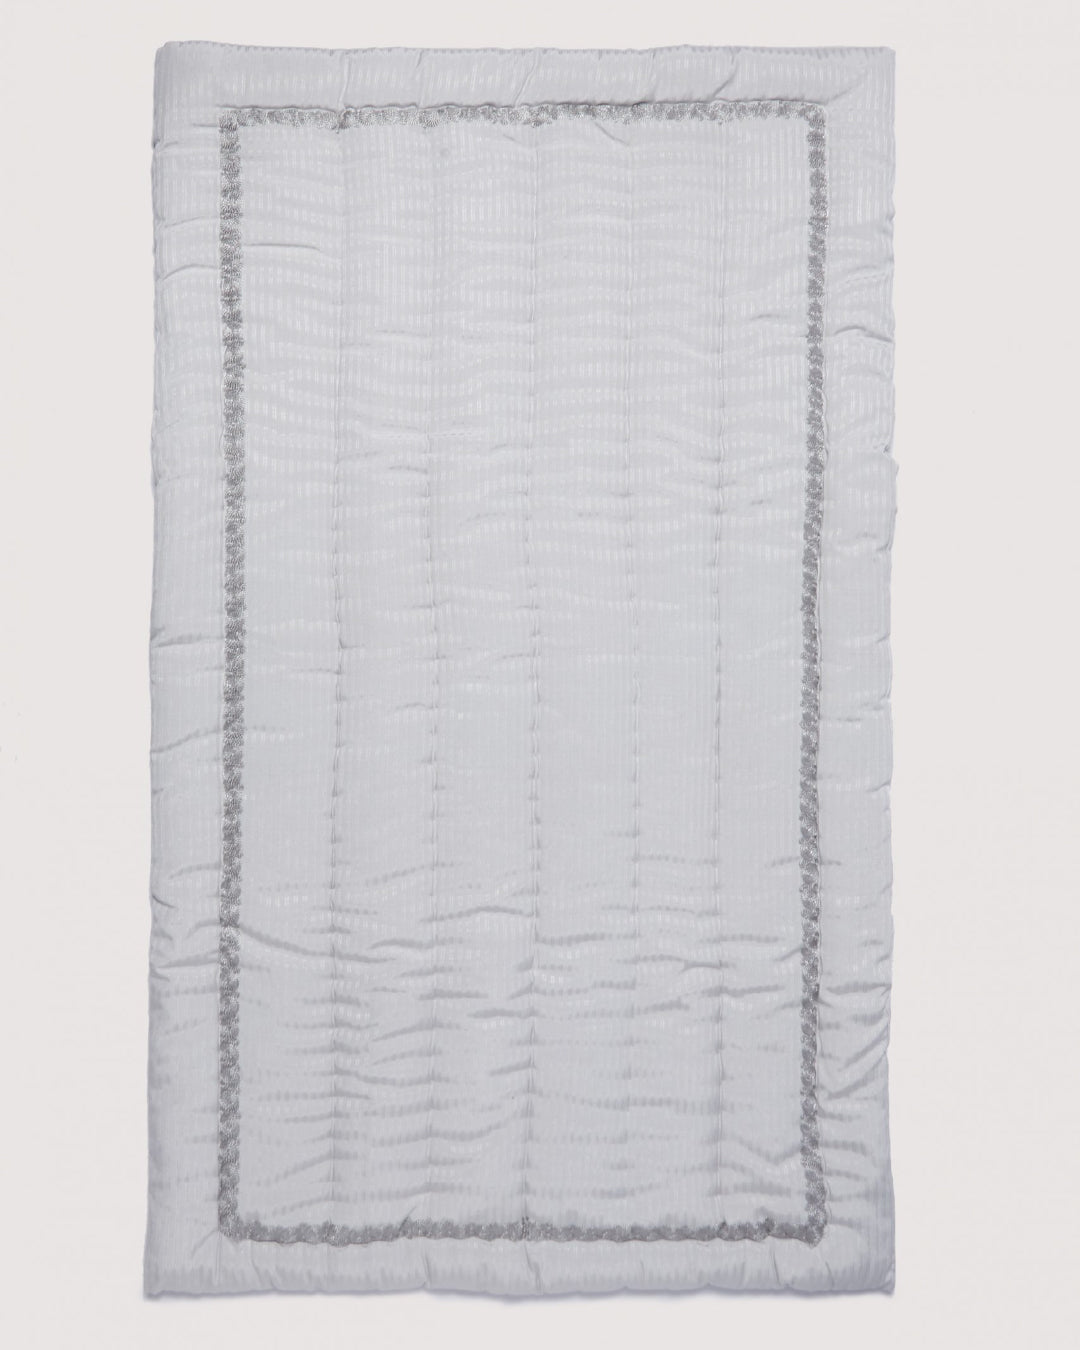 Grey Lined  Embroidery Prayer Mat